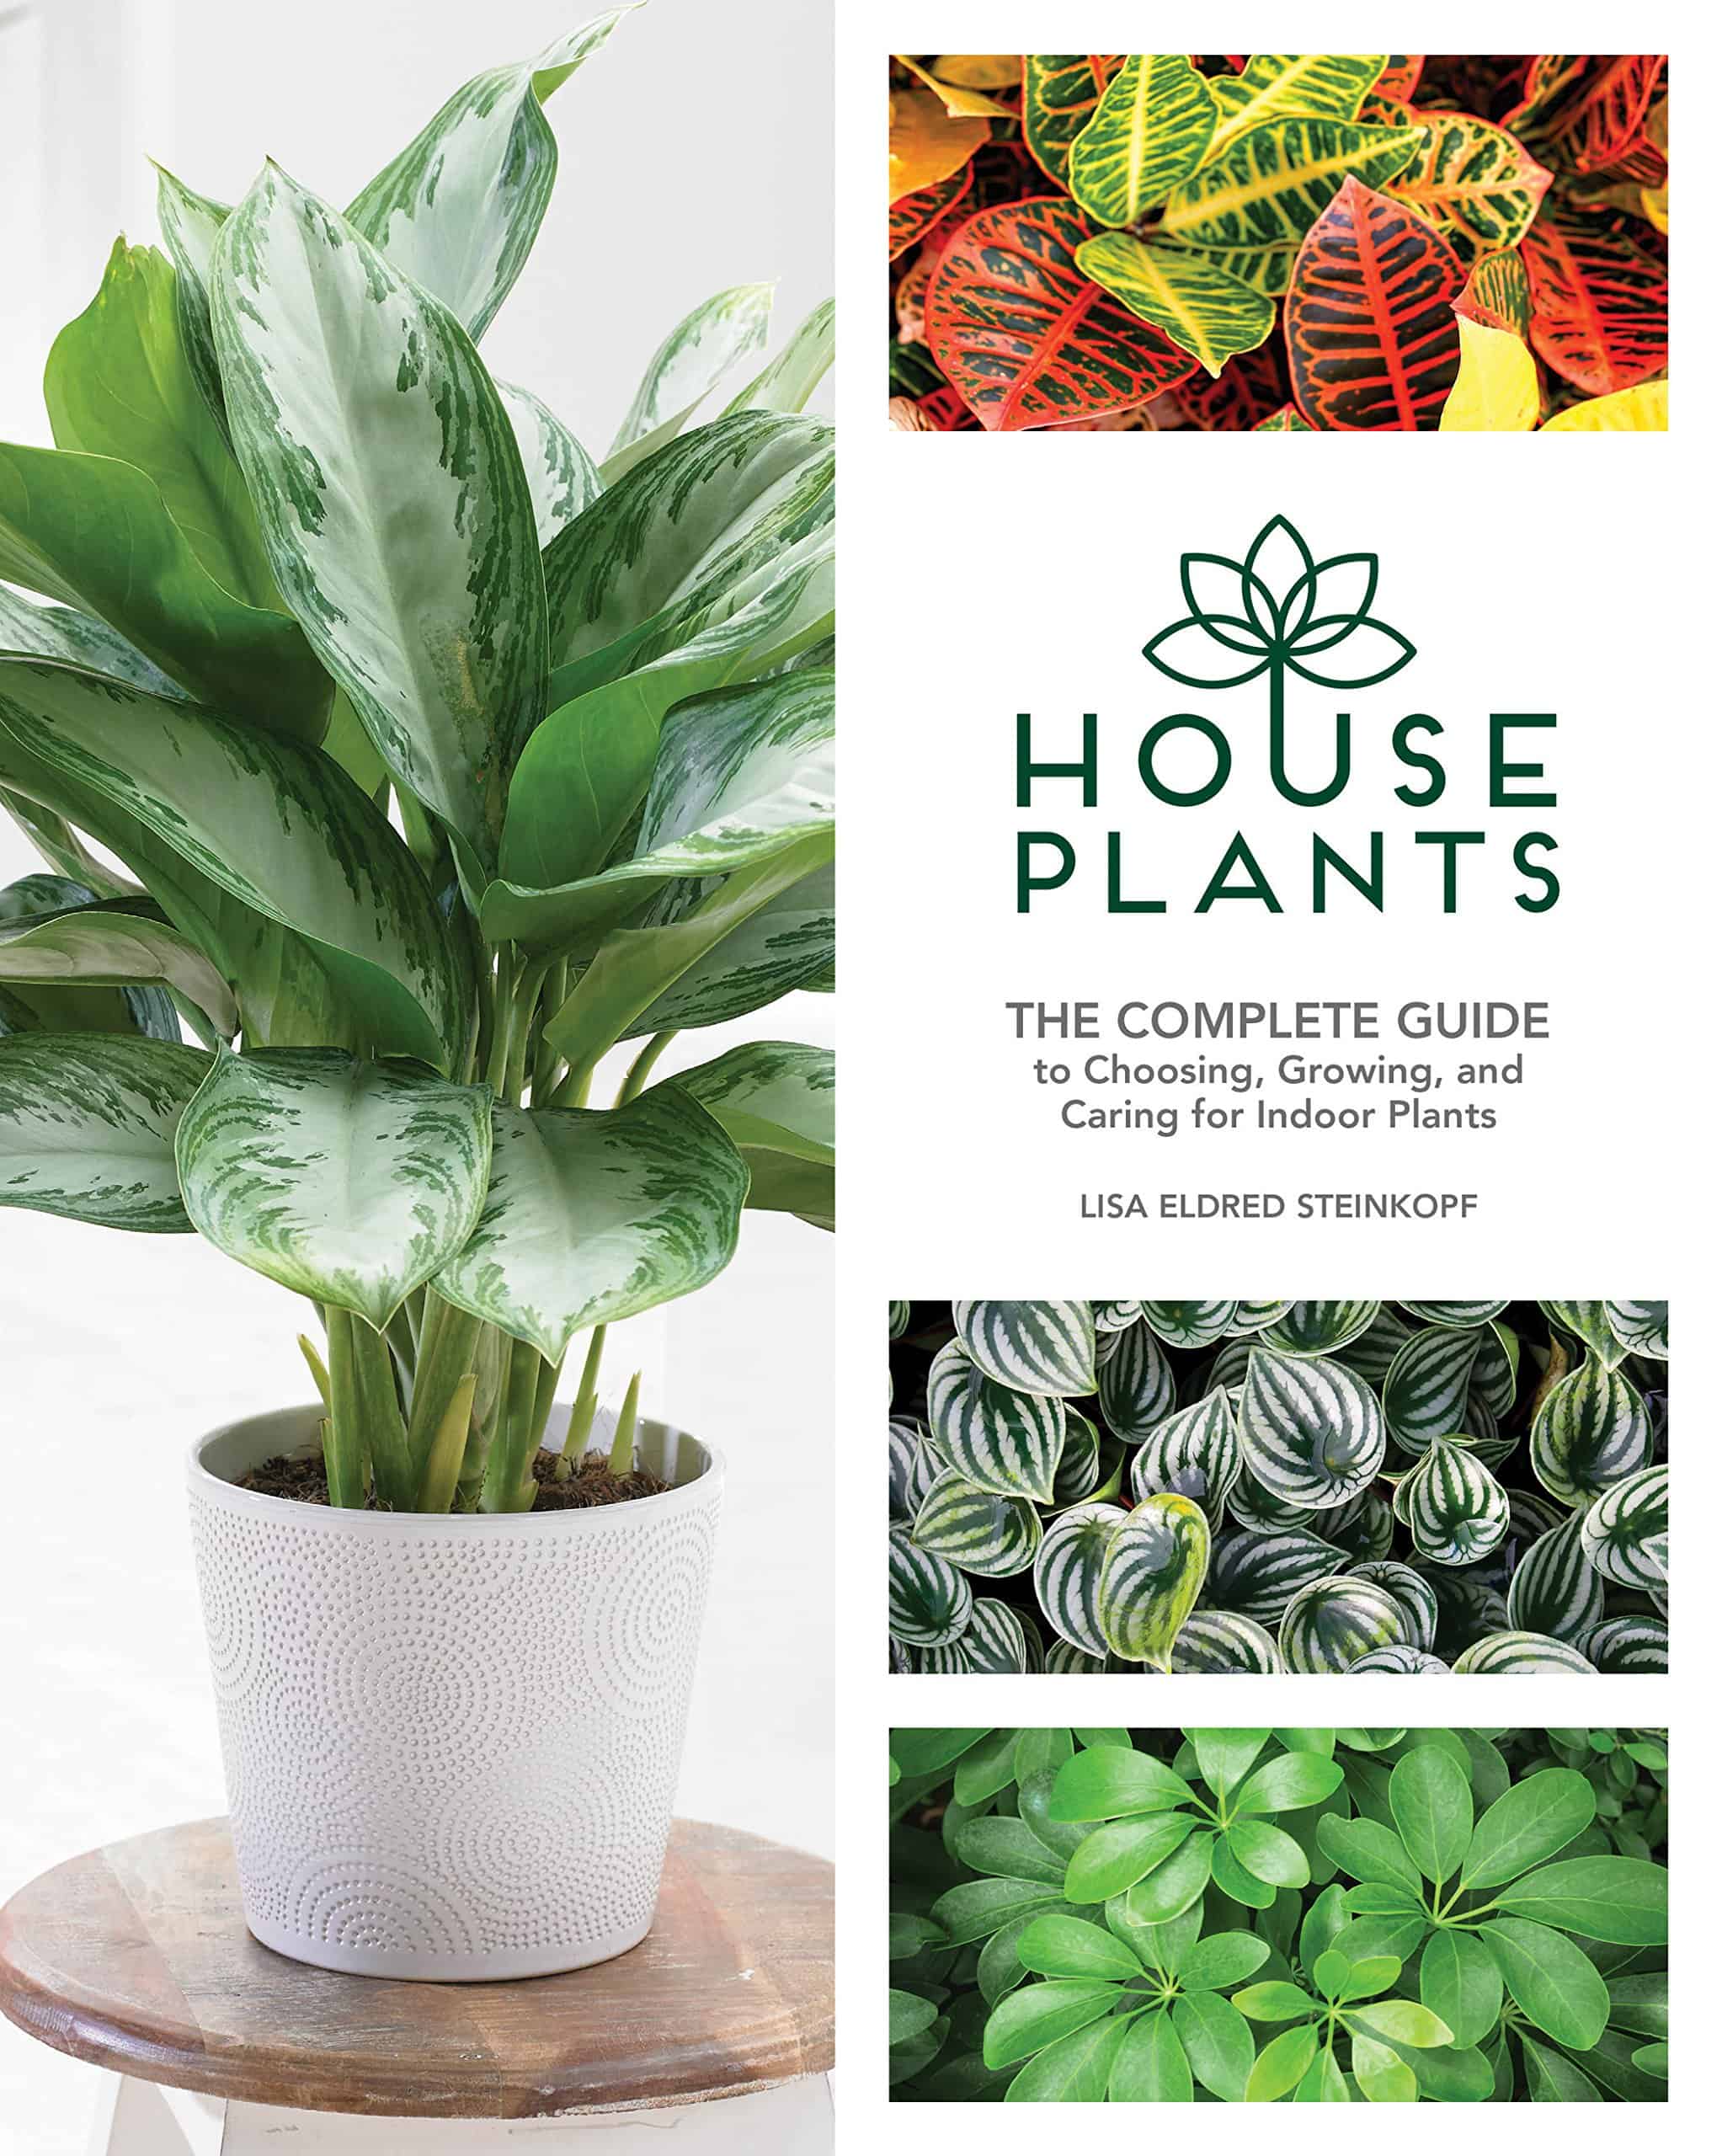 House Plants The Complete Guide to Choosing, Growing and Caring for Indoor Plants